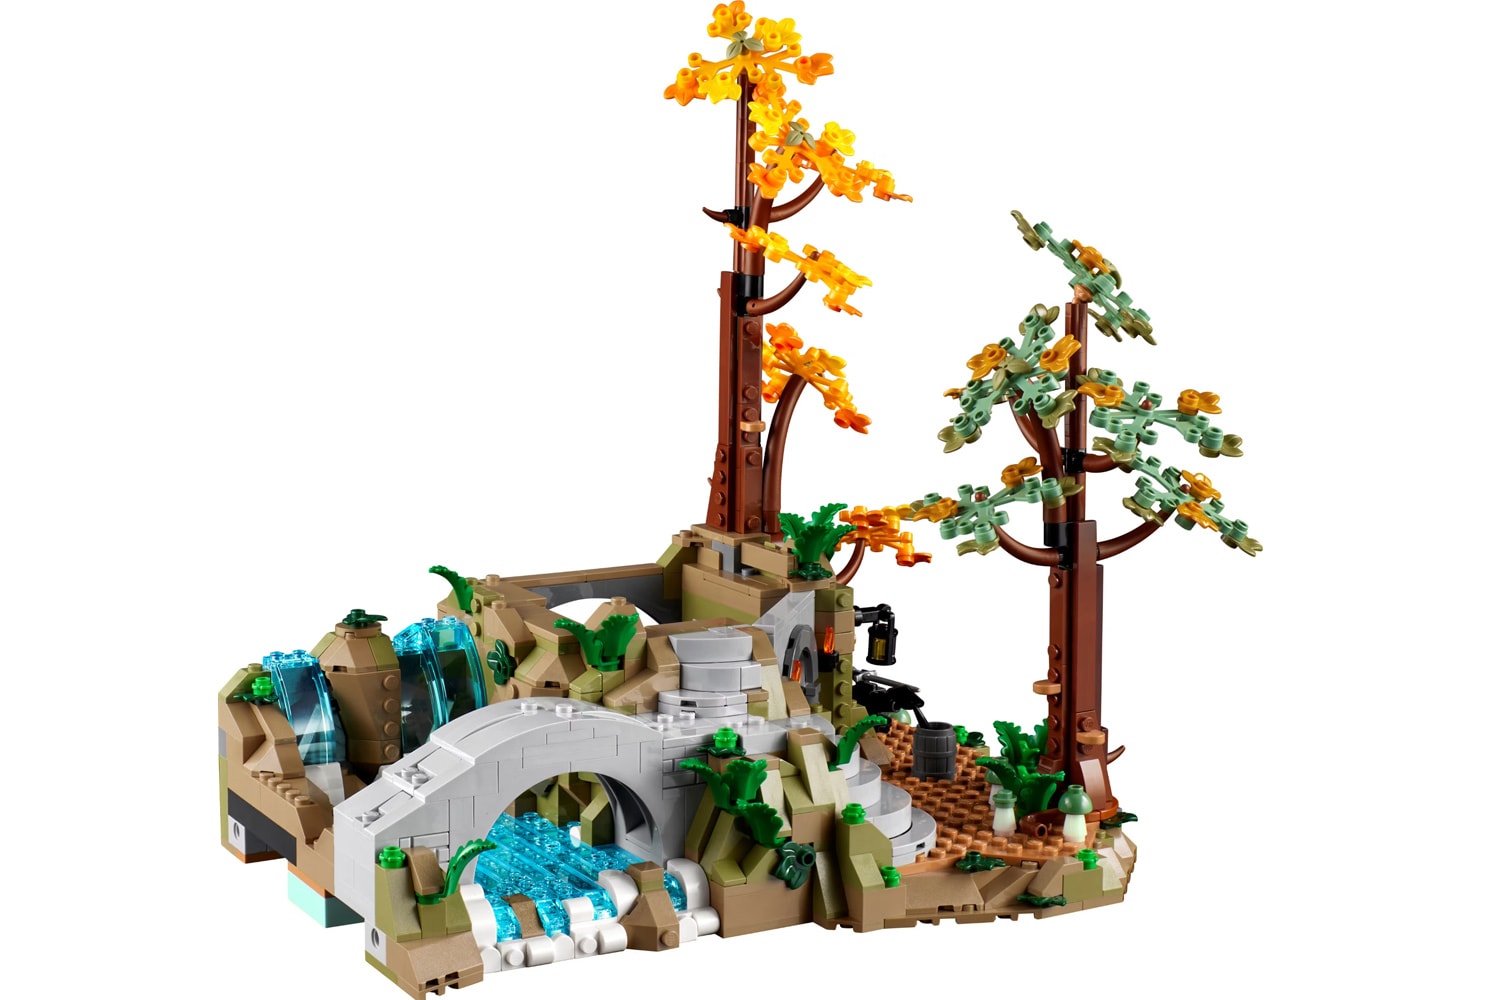 LEGO 推出《魔戒 The Lord of the Rings》經典場景 Rivendell 積木模型